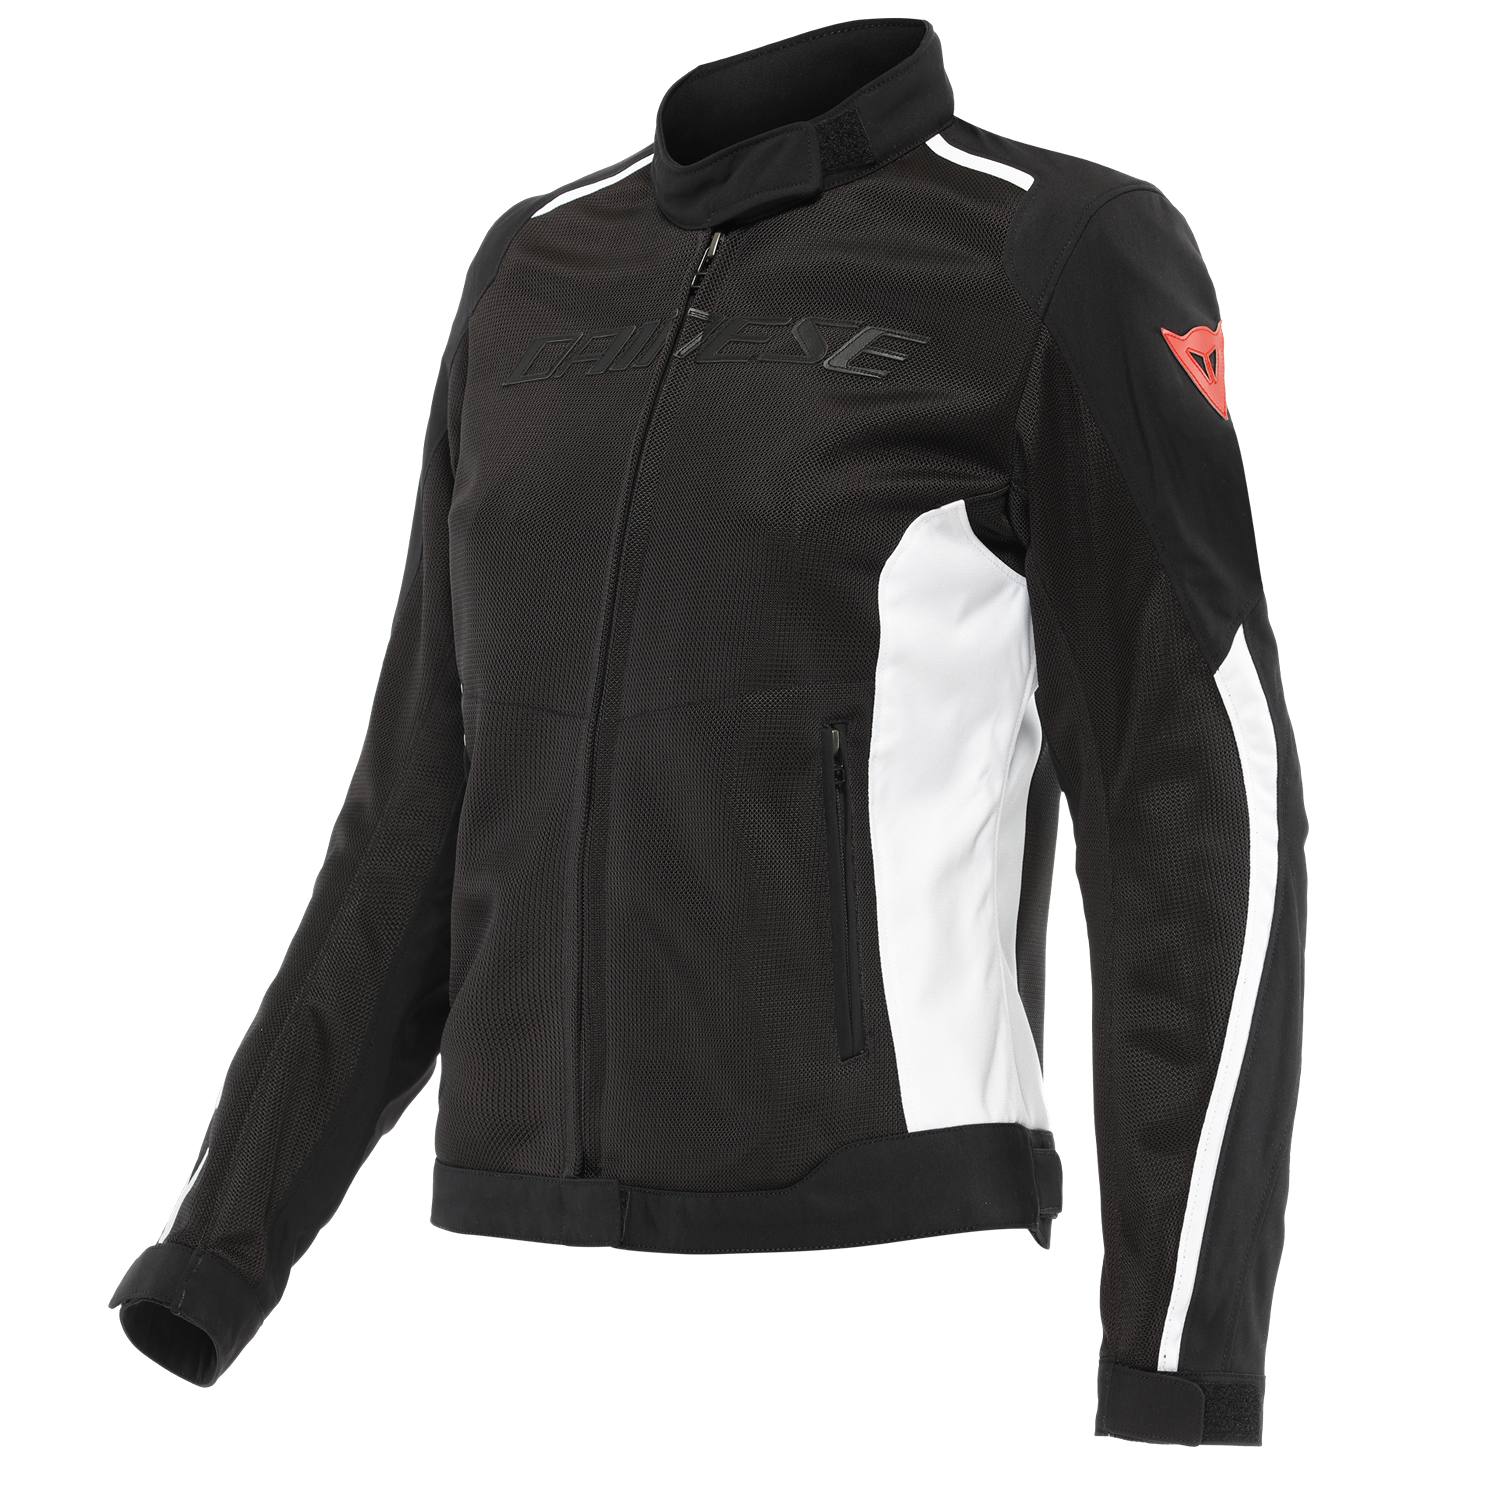 Image of Dainese Hydraflux 2 Air D-Dry Jacket Lady Black White Size 44 ID 8051019401694